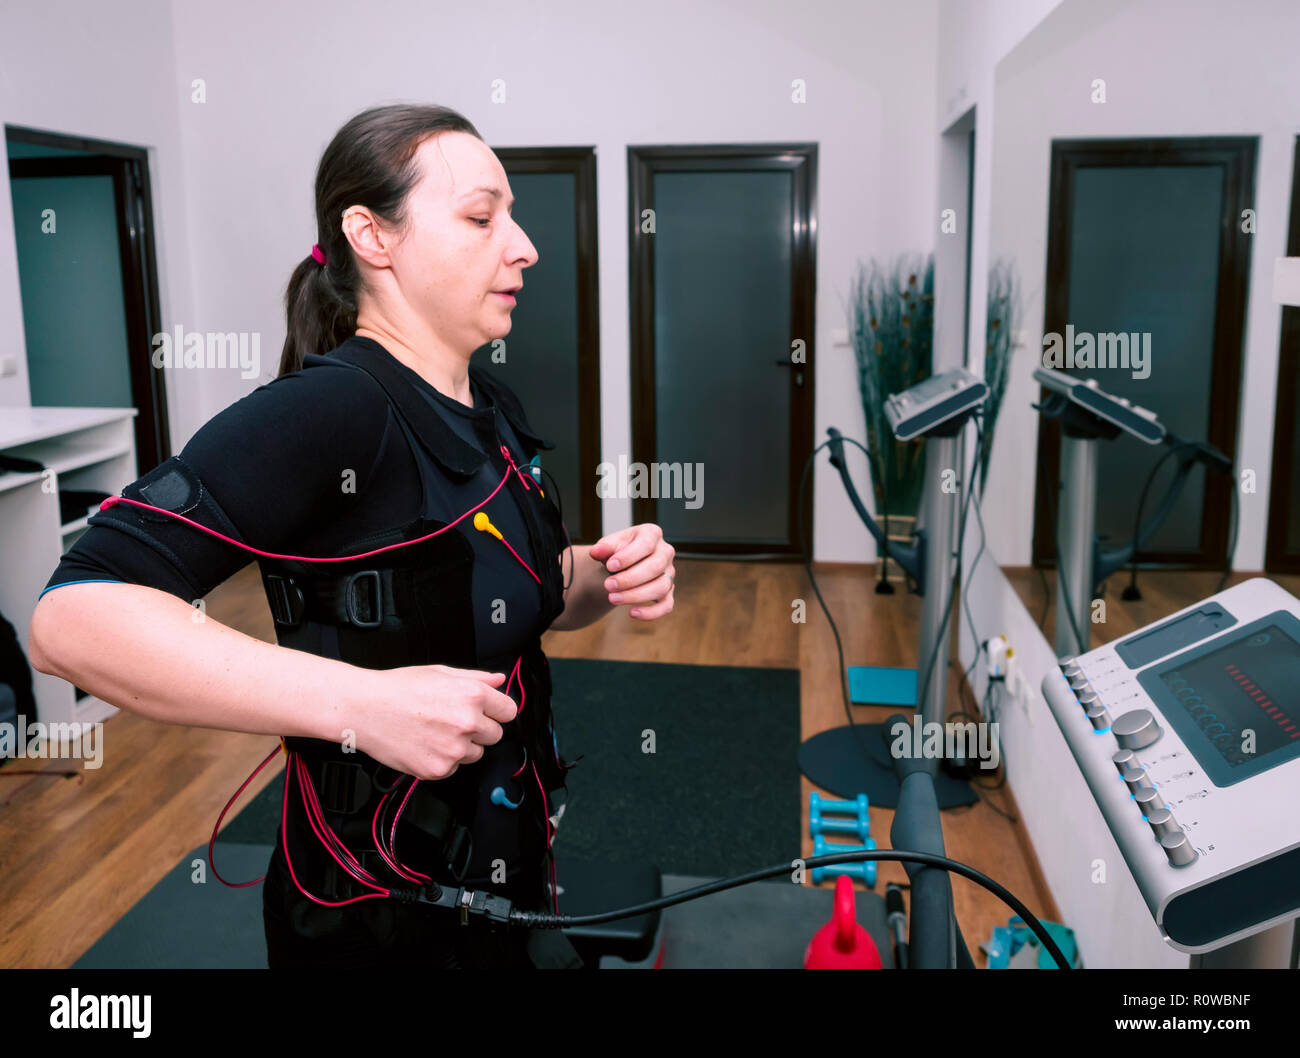 Woman in electro muscular stimulation suit training Stock Photo